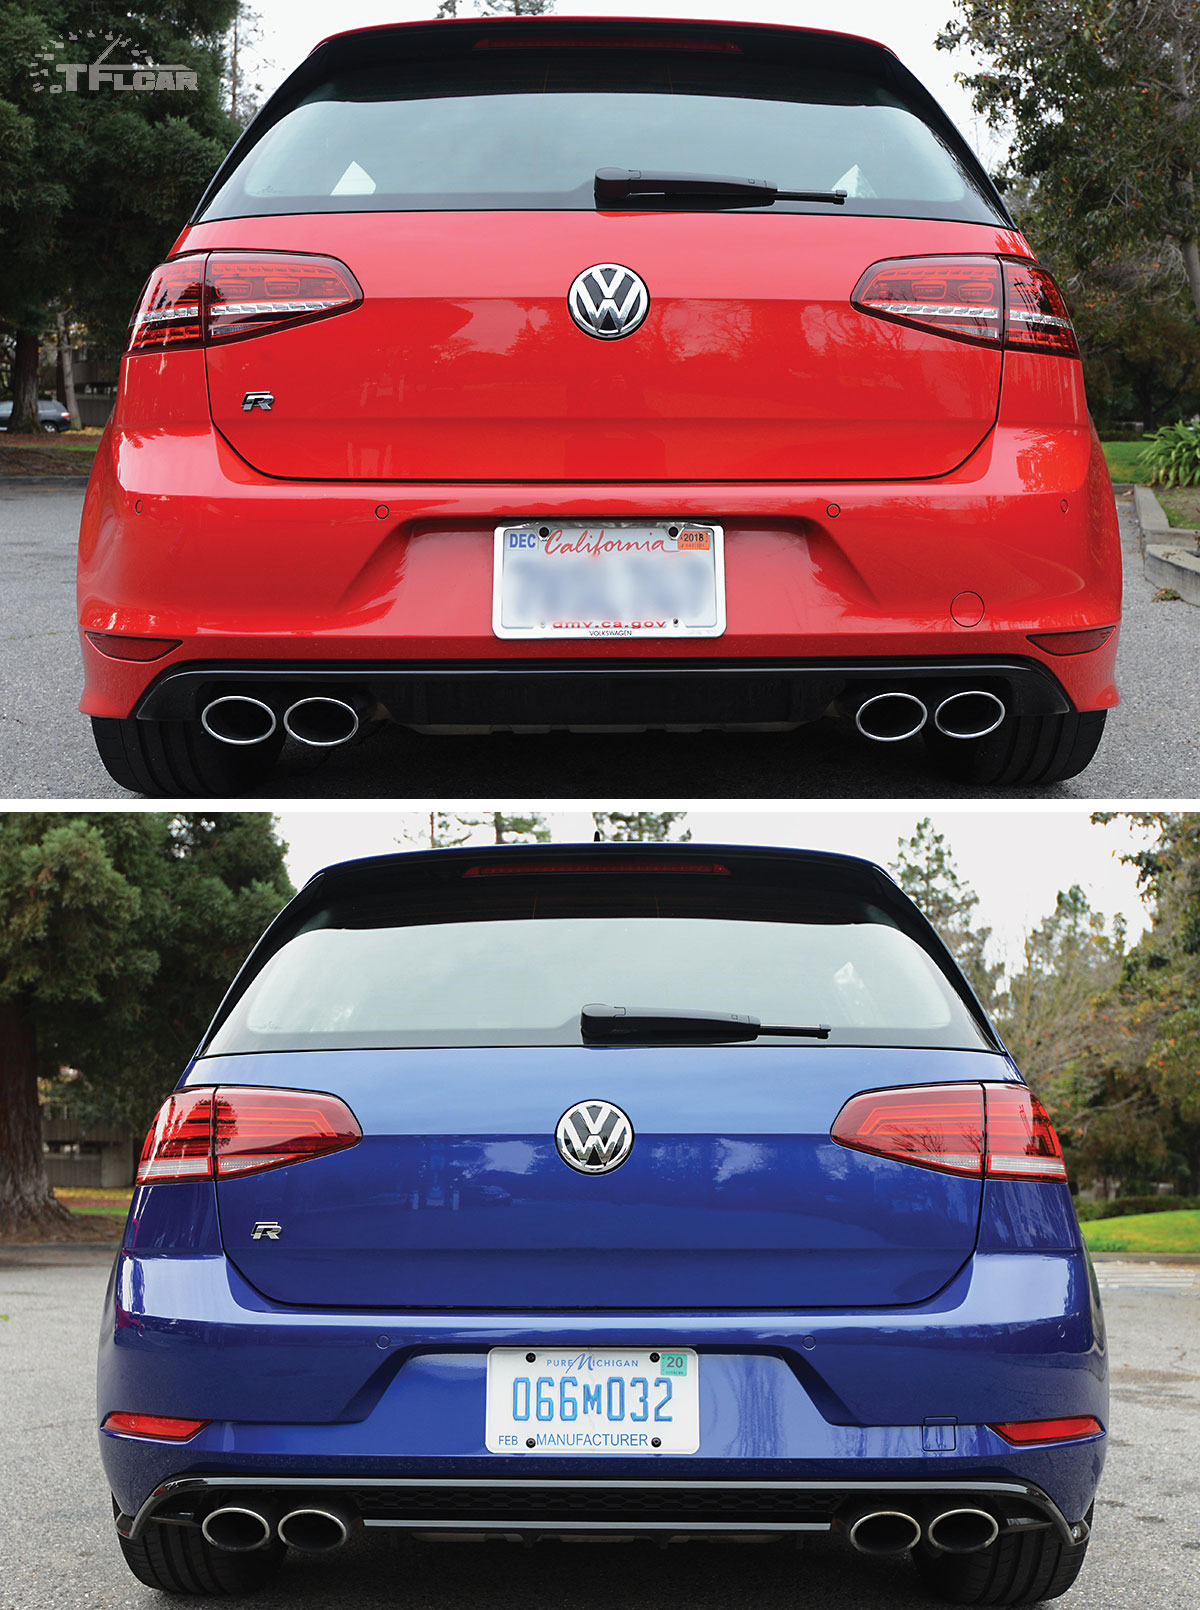 What's New for the 2018 Volkswagen Golf R? VW's Made a Few ...